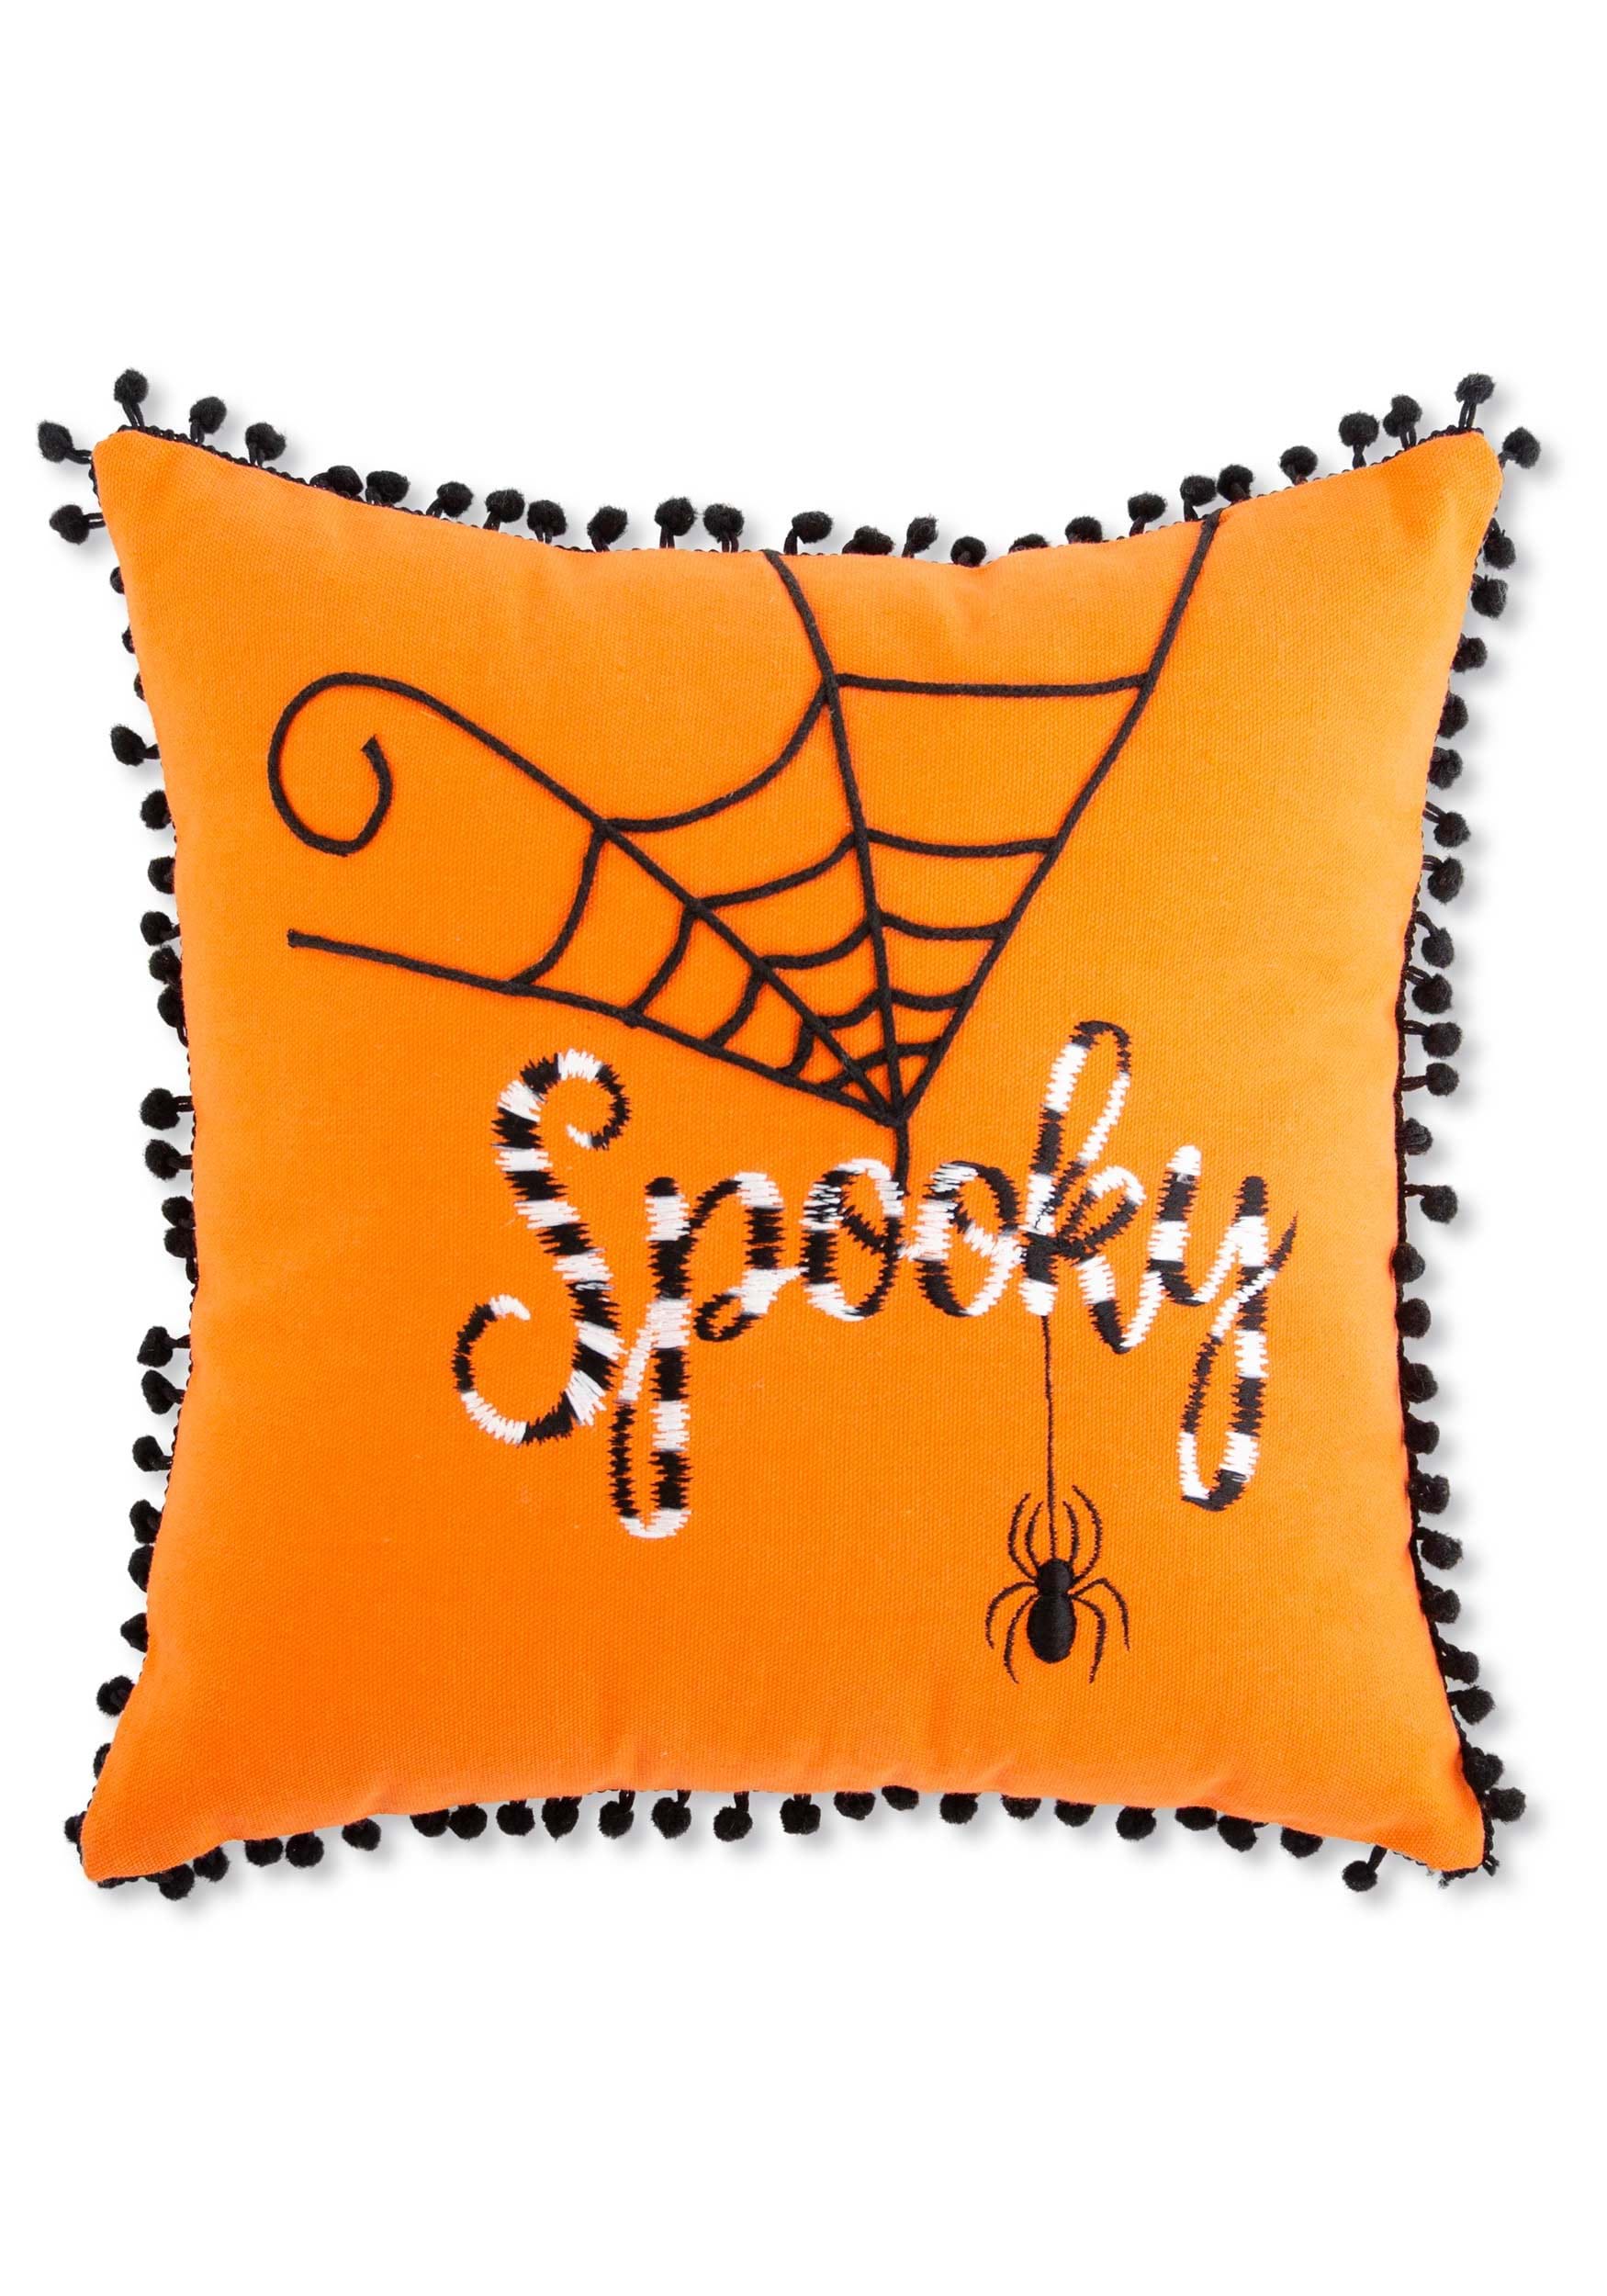 12″ Orange Halloween Pillow with Black and White Embroidery